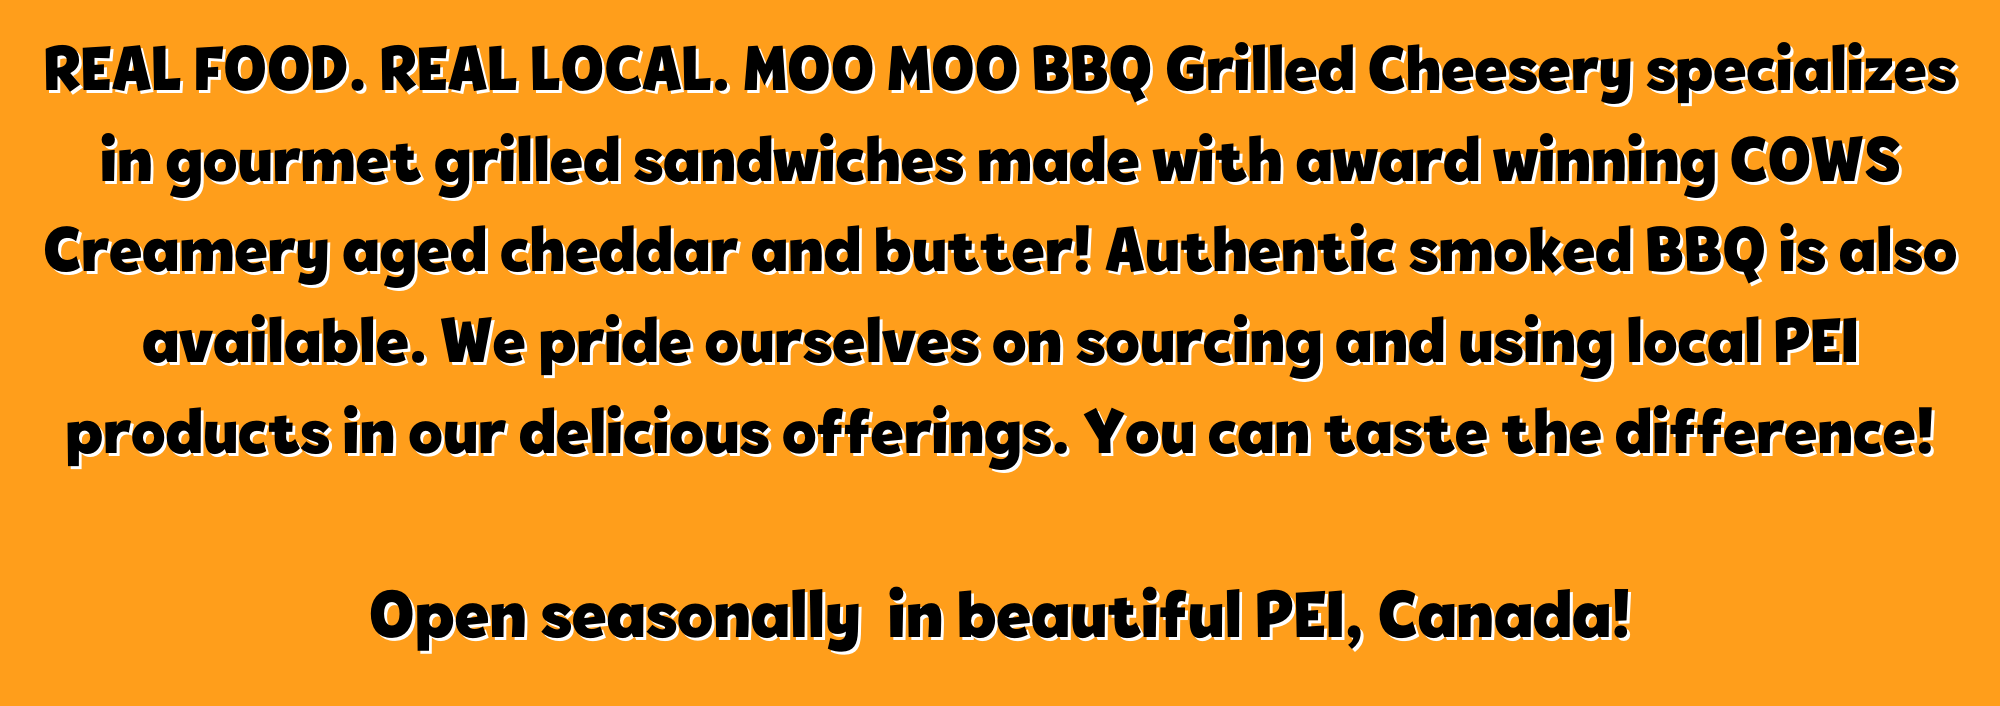 Real Food. Real Local. Moo Moo BBQ Grilled Cheesery specializes in gourmet grilled sandwiches made with award winning COWS Creamery aged cheddar and butter! Authentic smoked BBQ is also available. We pride ourselves on sourcing and using local PEI products in our delicious offerings. You can taste the difference! Open seasonally in beautiful PEI, Canada!